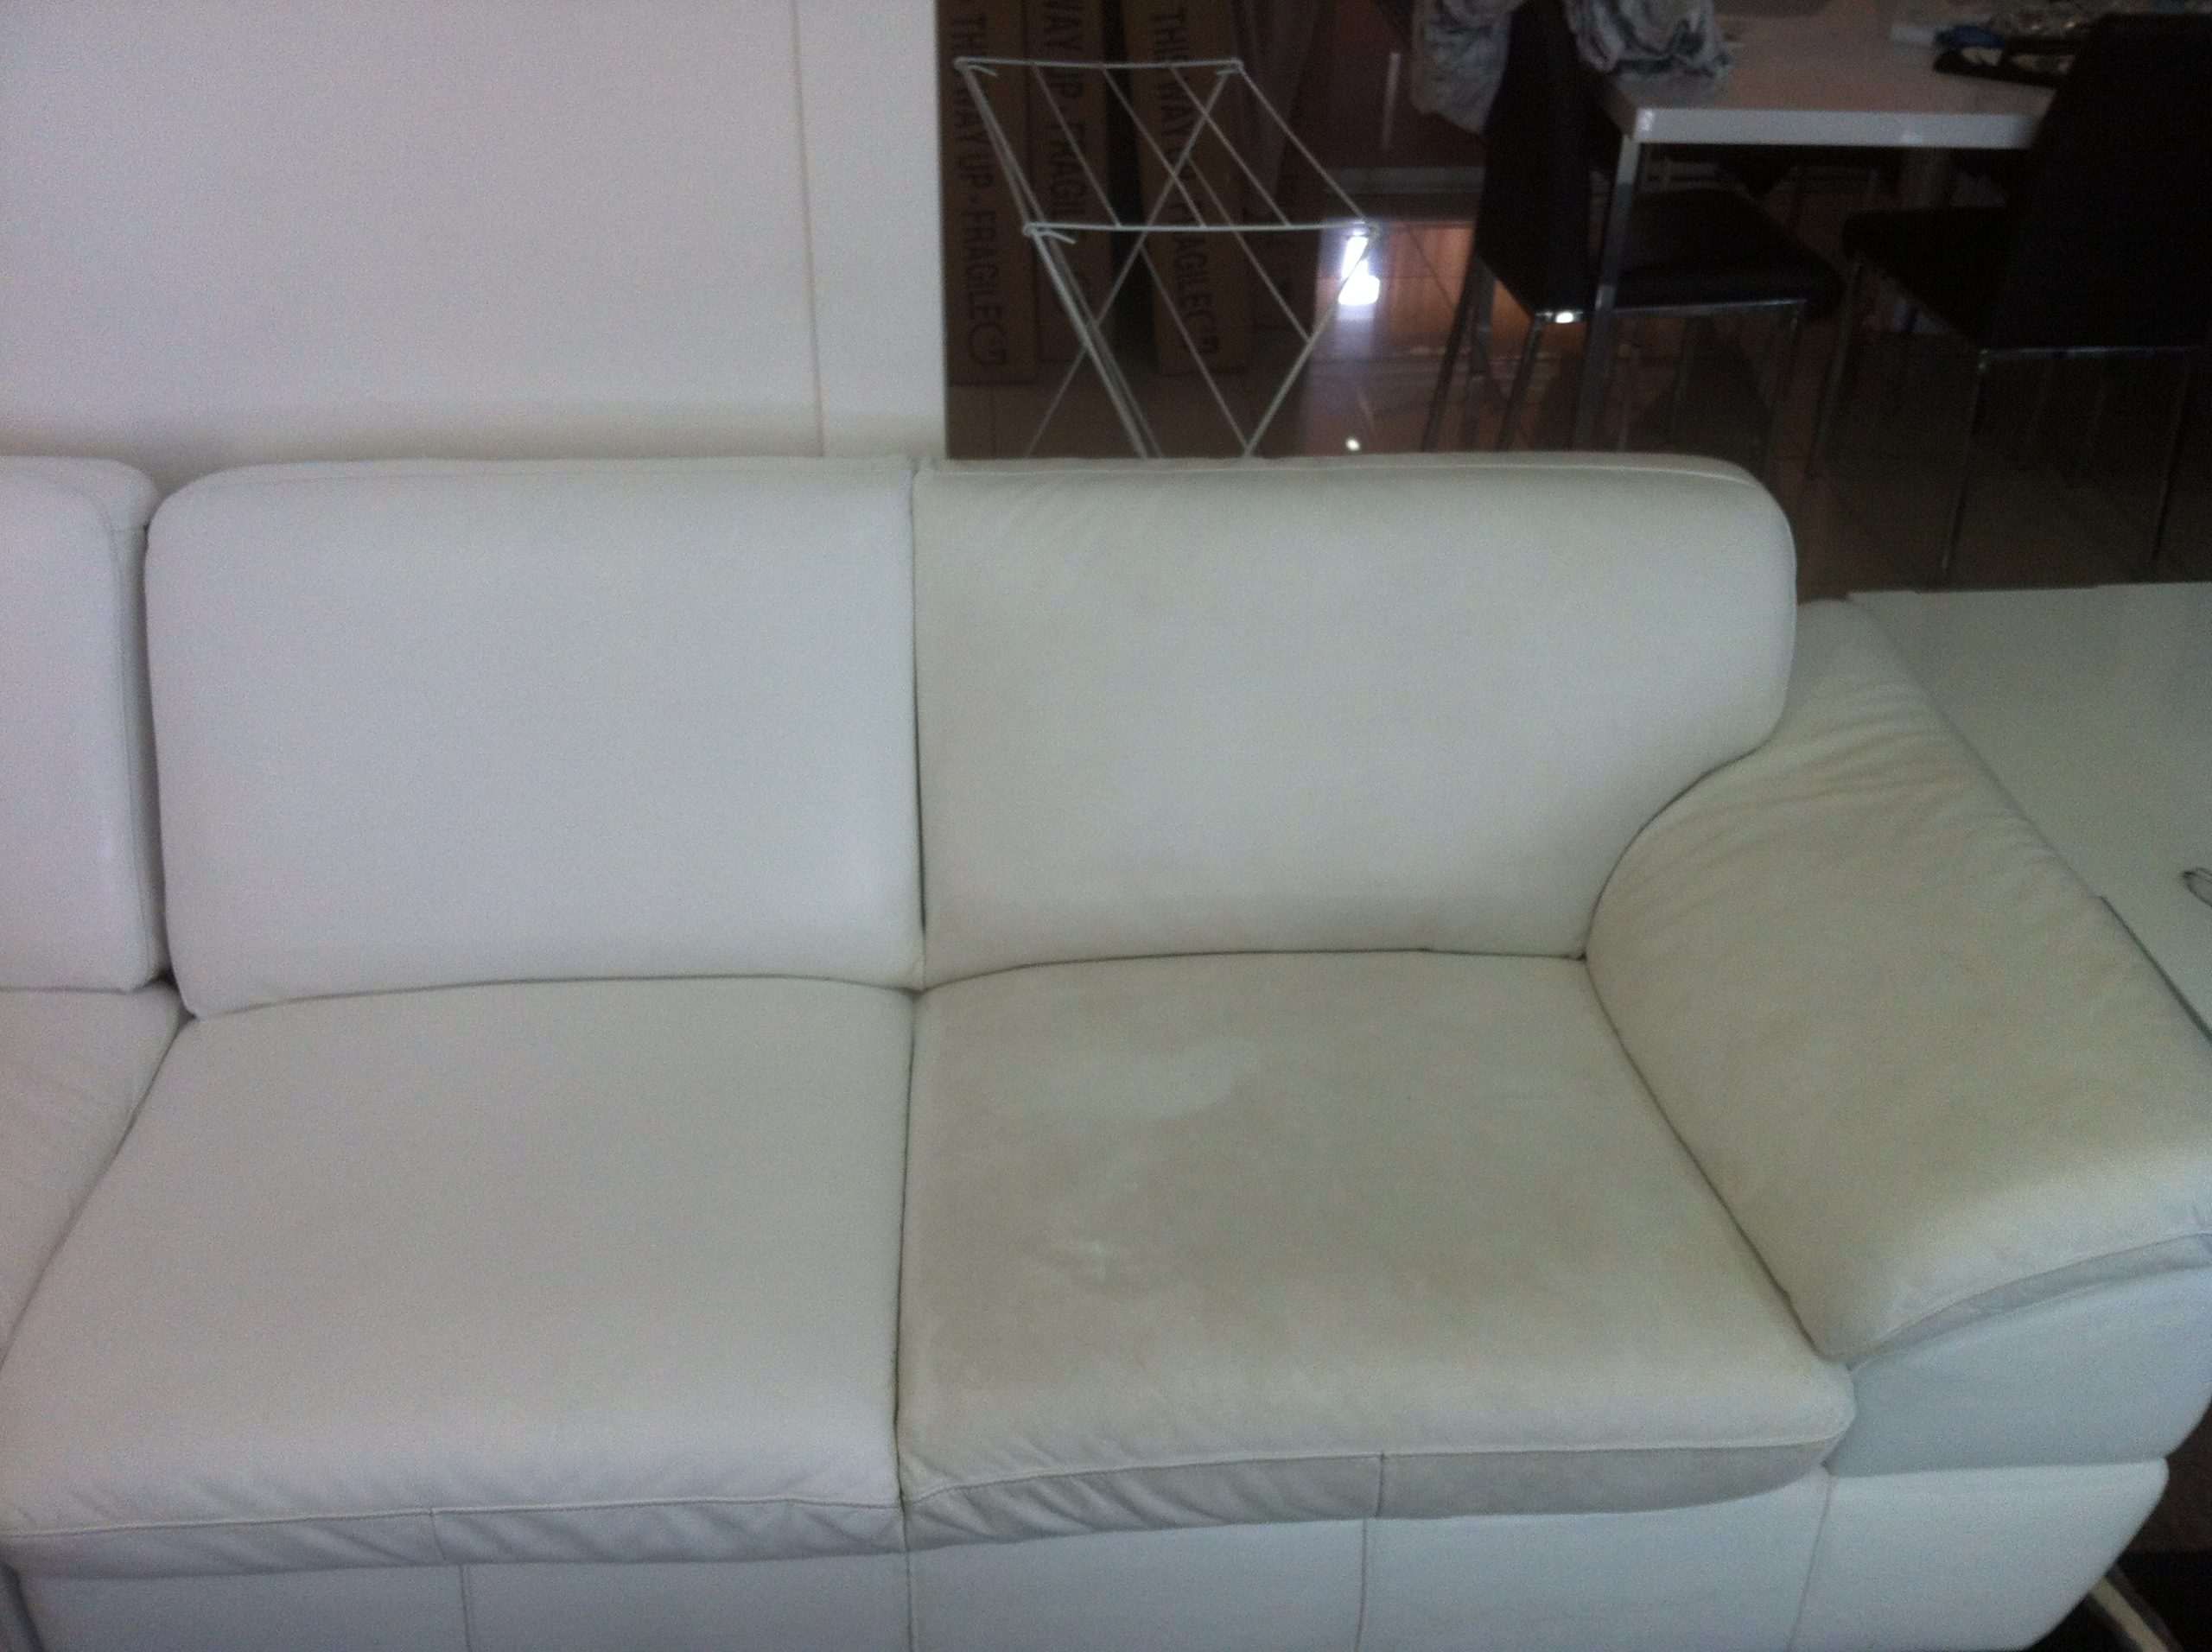 Half cleaned White leather couch by Priceless Carpet Cleaning